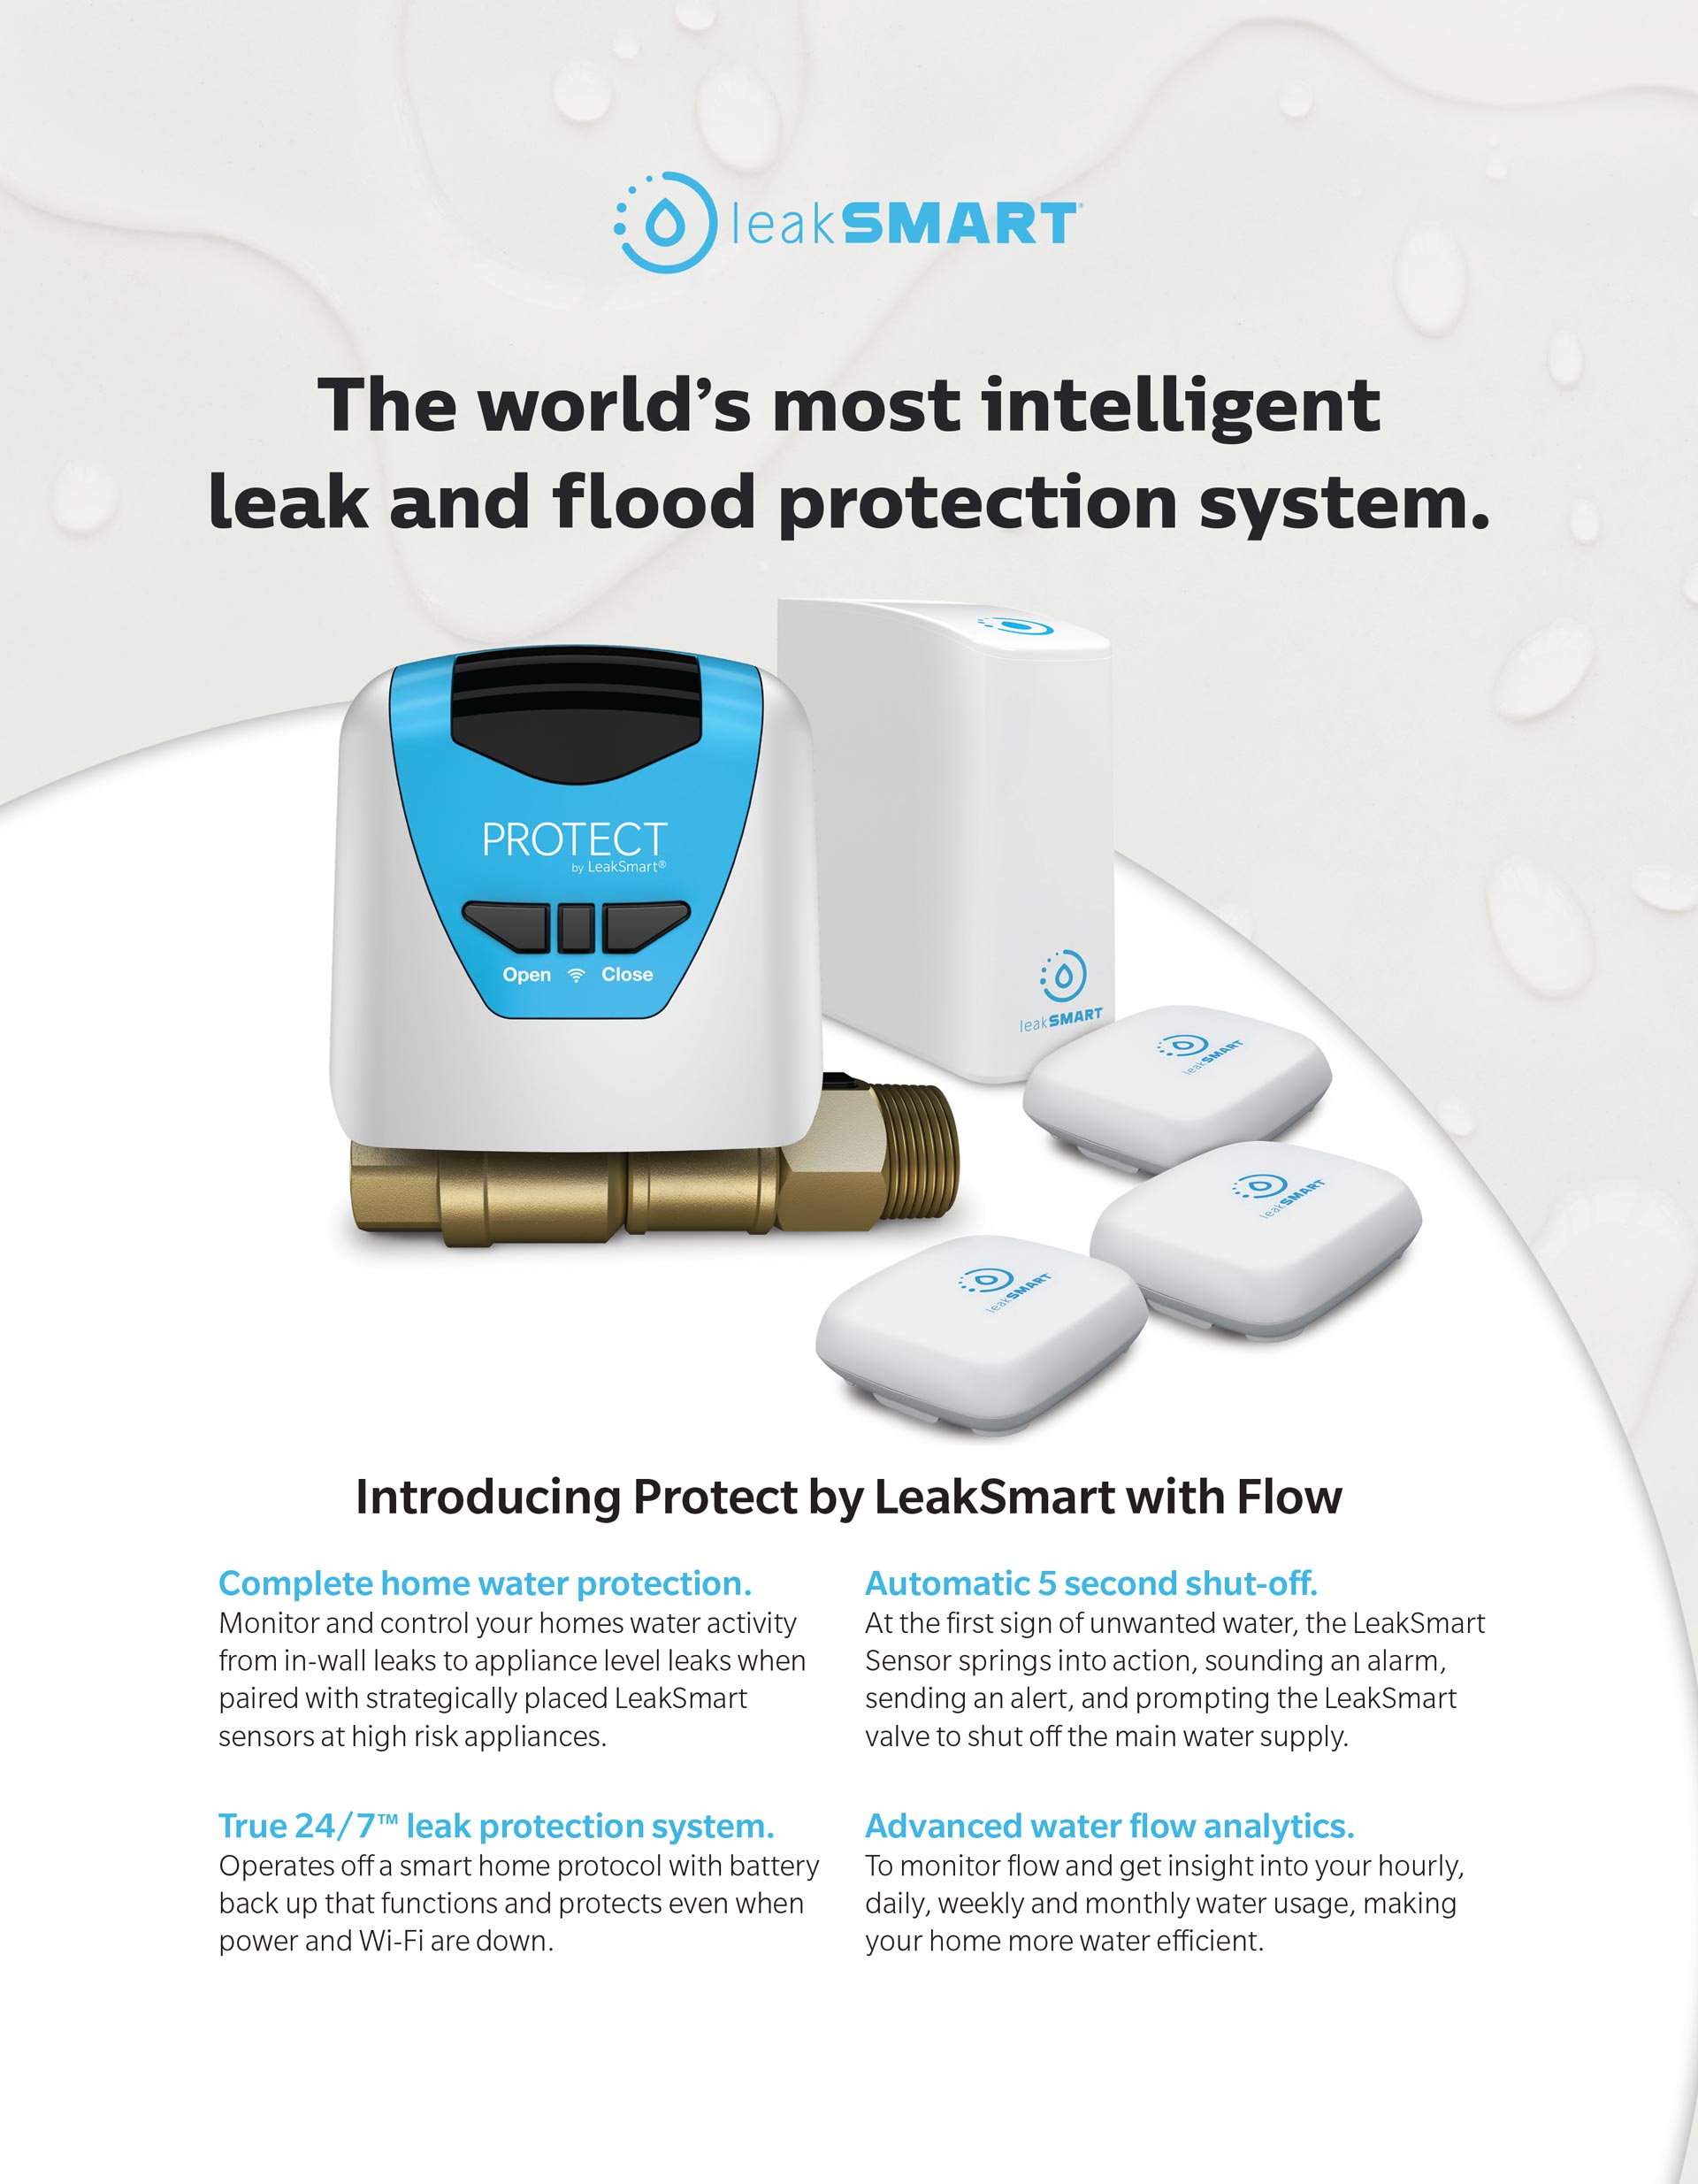 smart leak flood protection system, LeakSmart with water flow analytics, complete home water protection